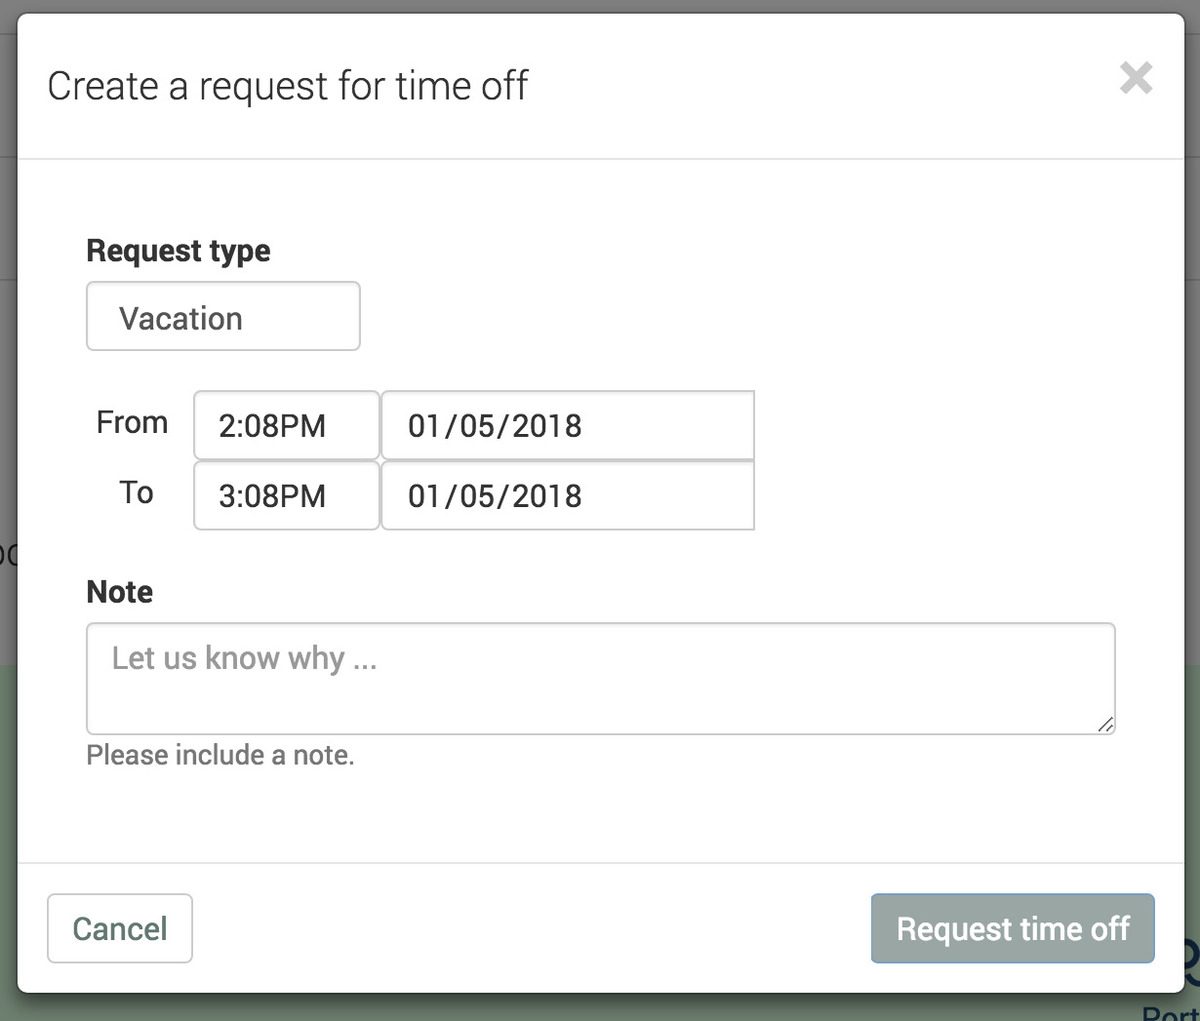 Create requests off easily